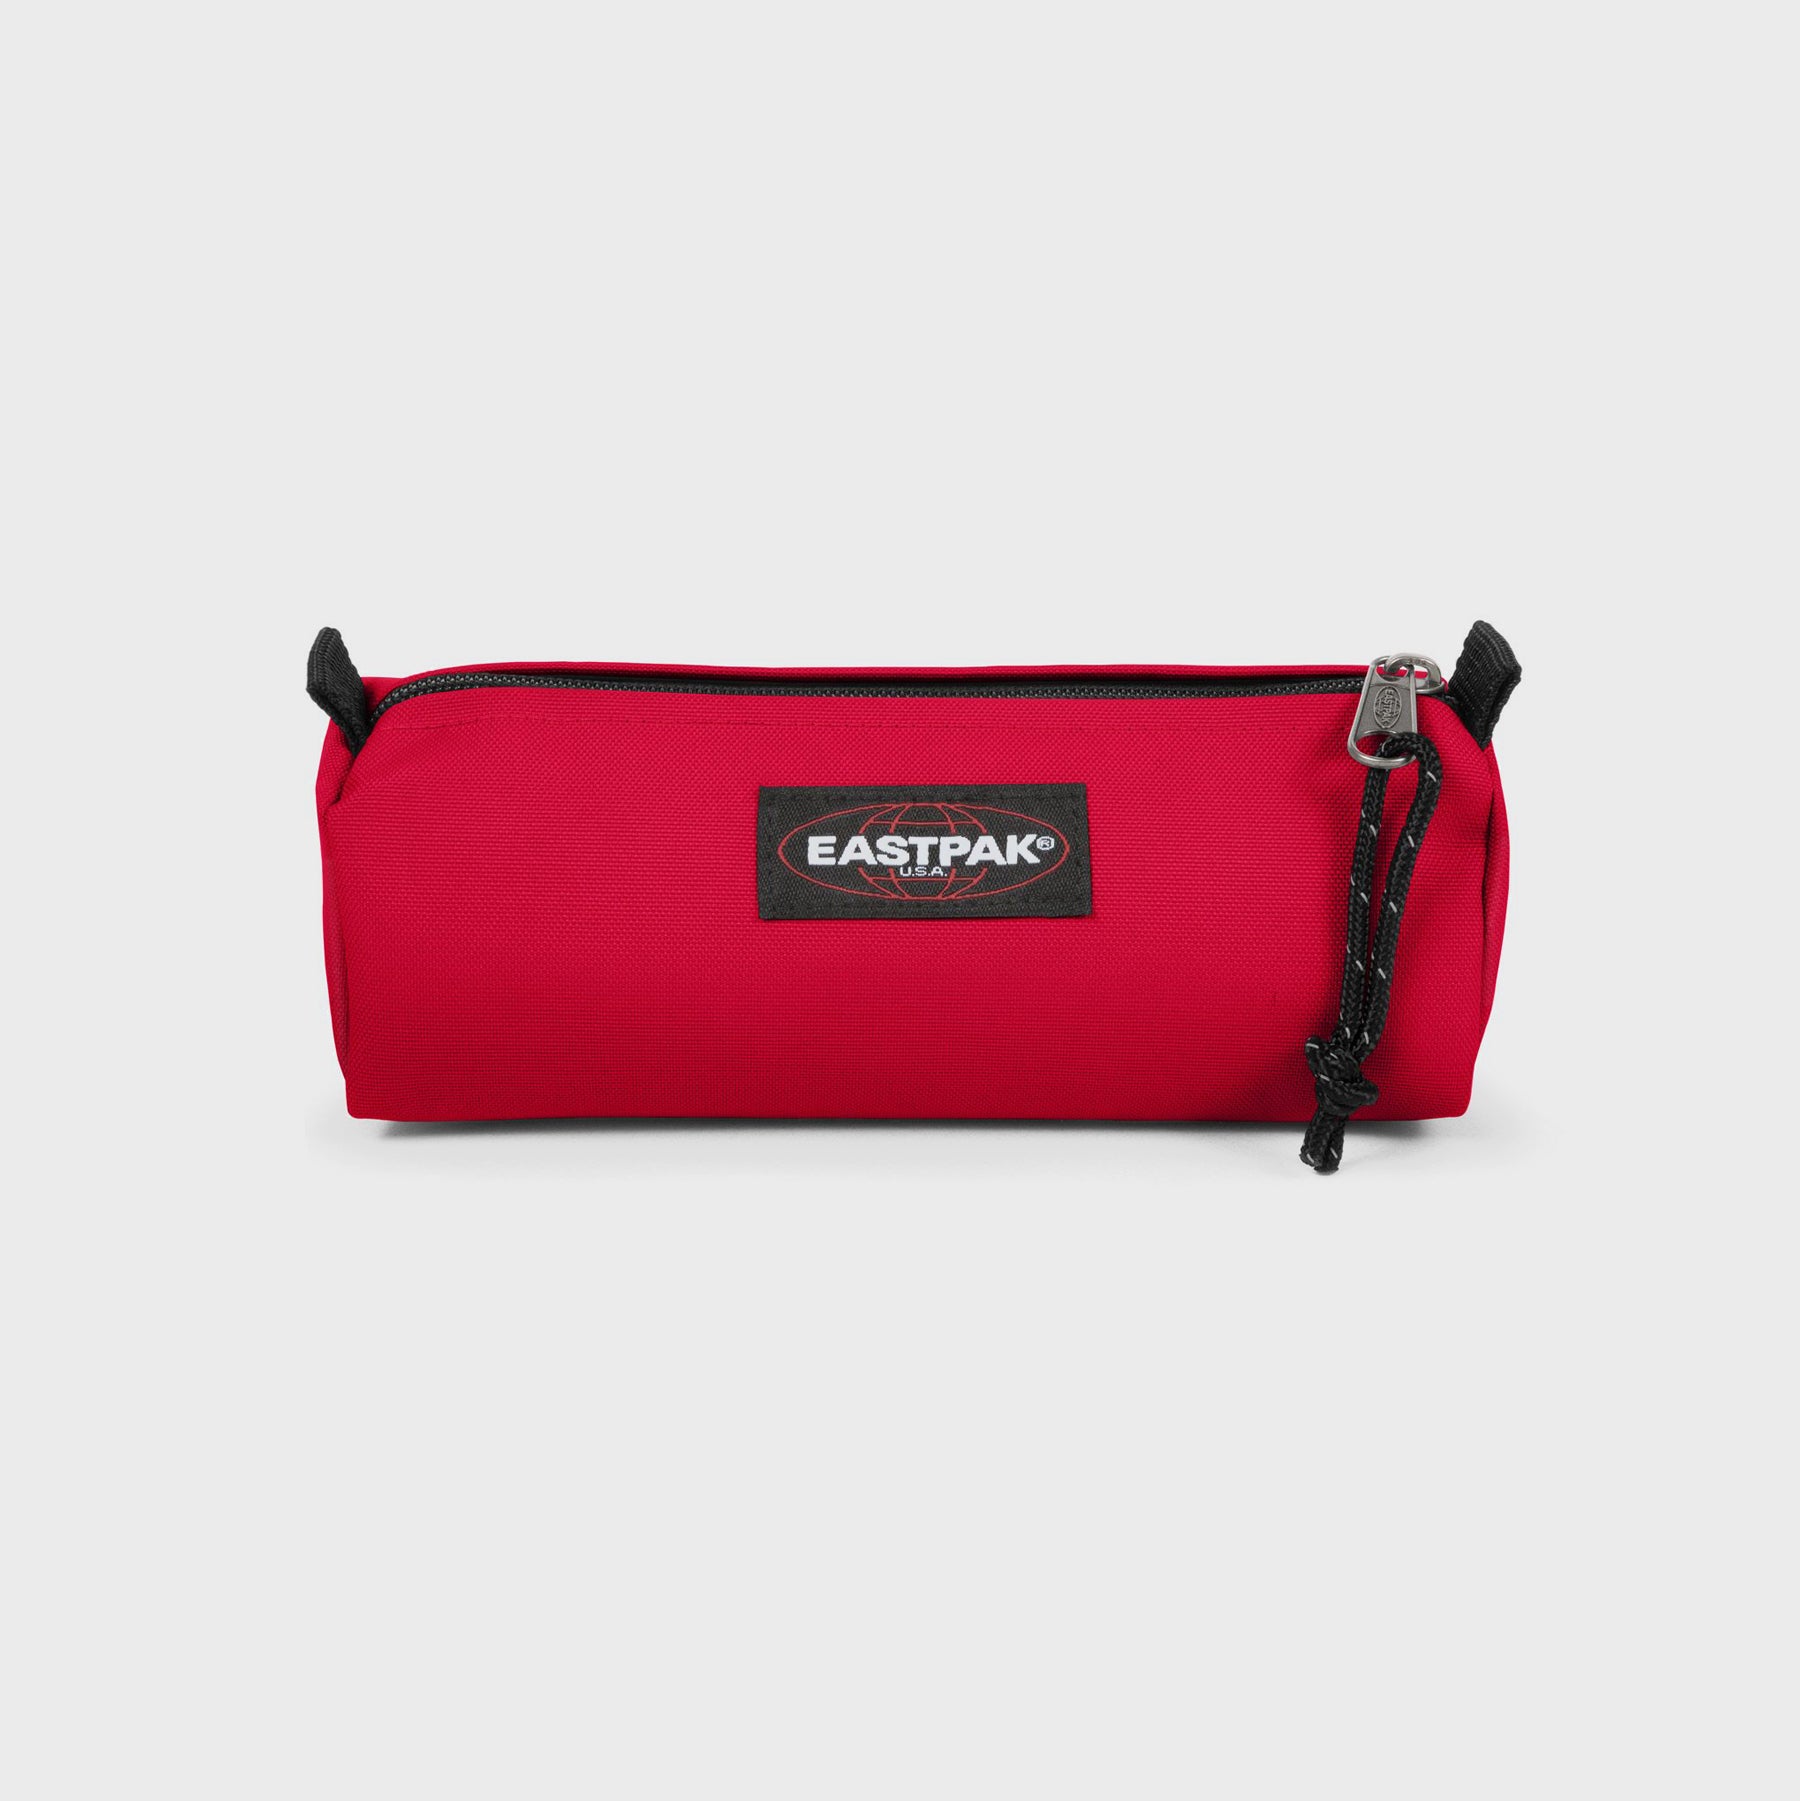 1 trousse Eastpak - Benchmark - 1 compartiment - Wally Pattern